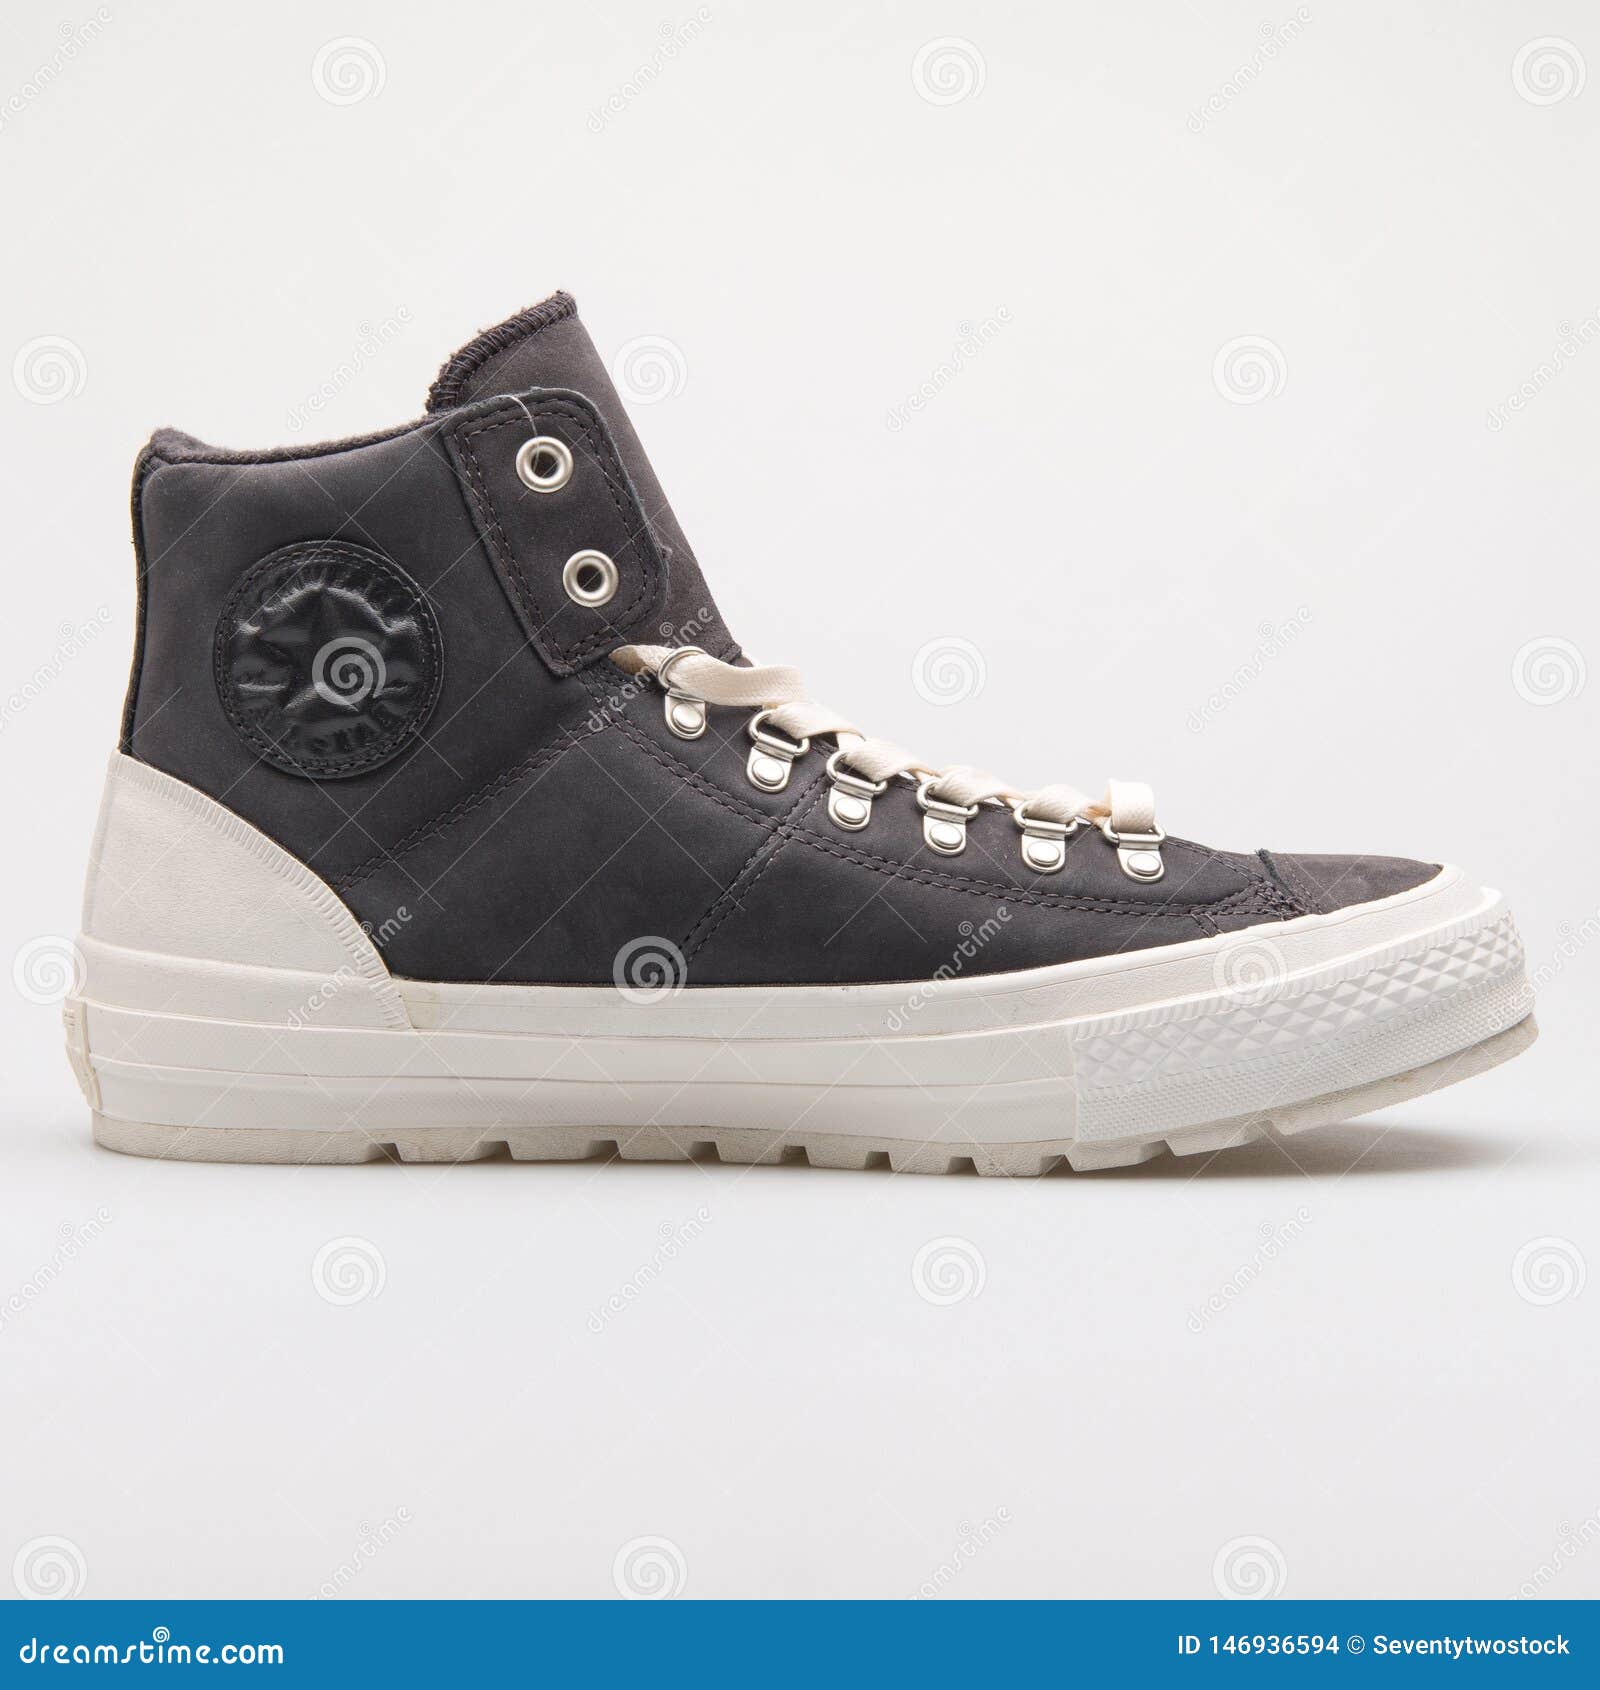 Converse Chuck All Star Street Hiker High Sneaker Editorial Stock Image - Image of converse: